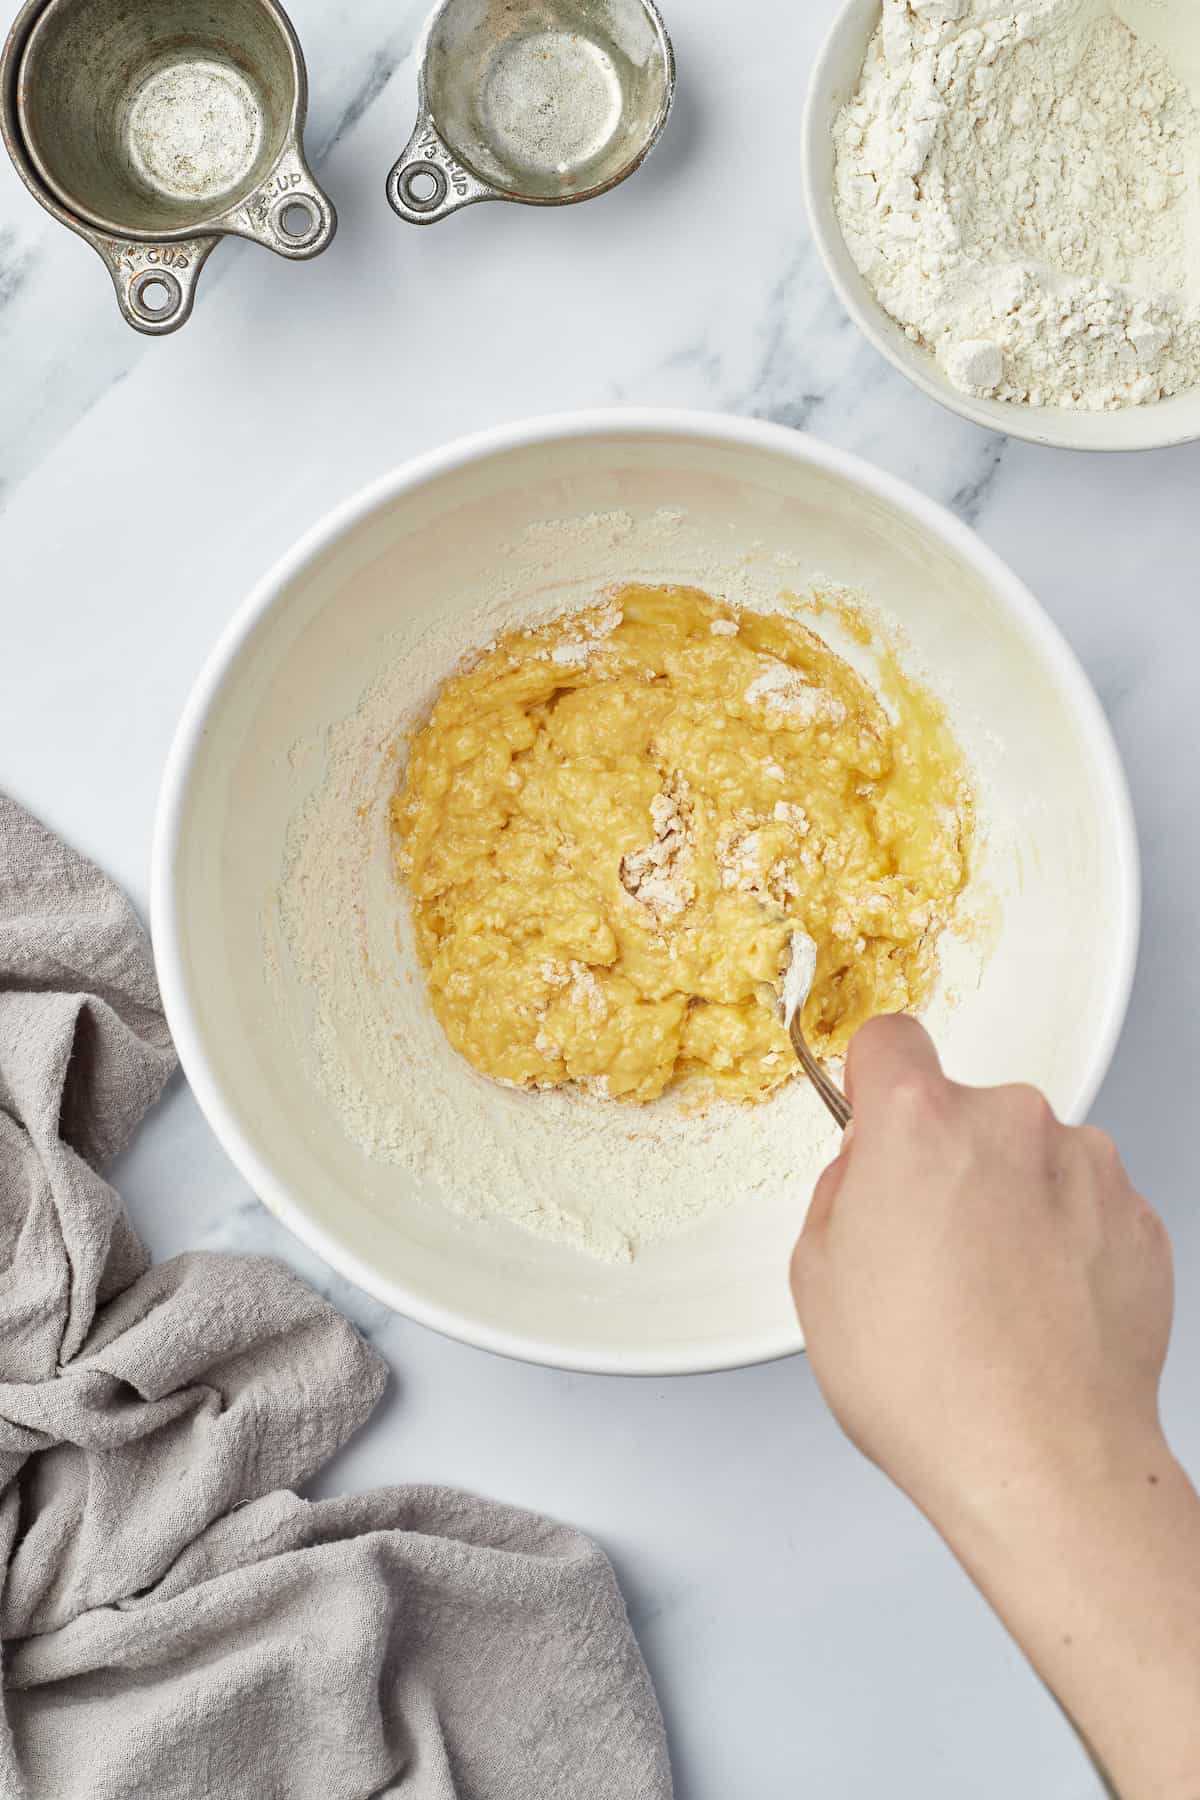 A mixing bowl full of egg noodle dough while the flour is being added